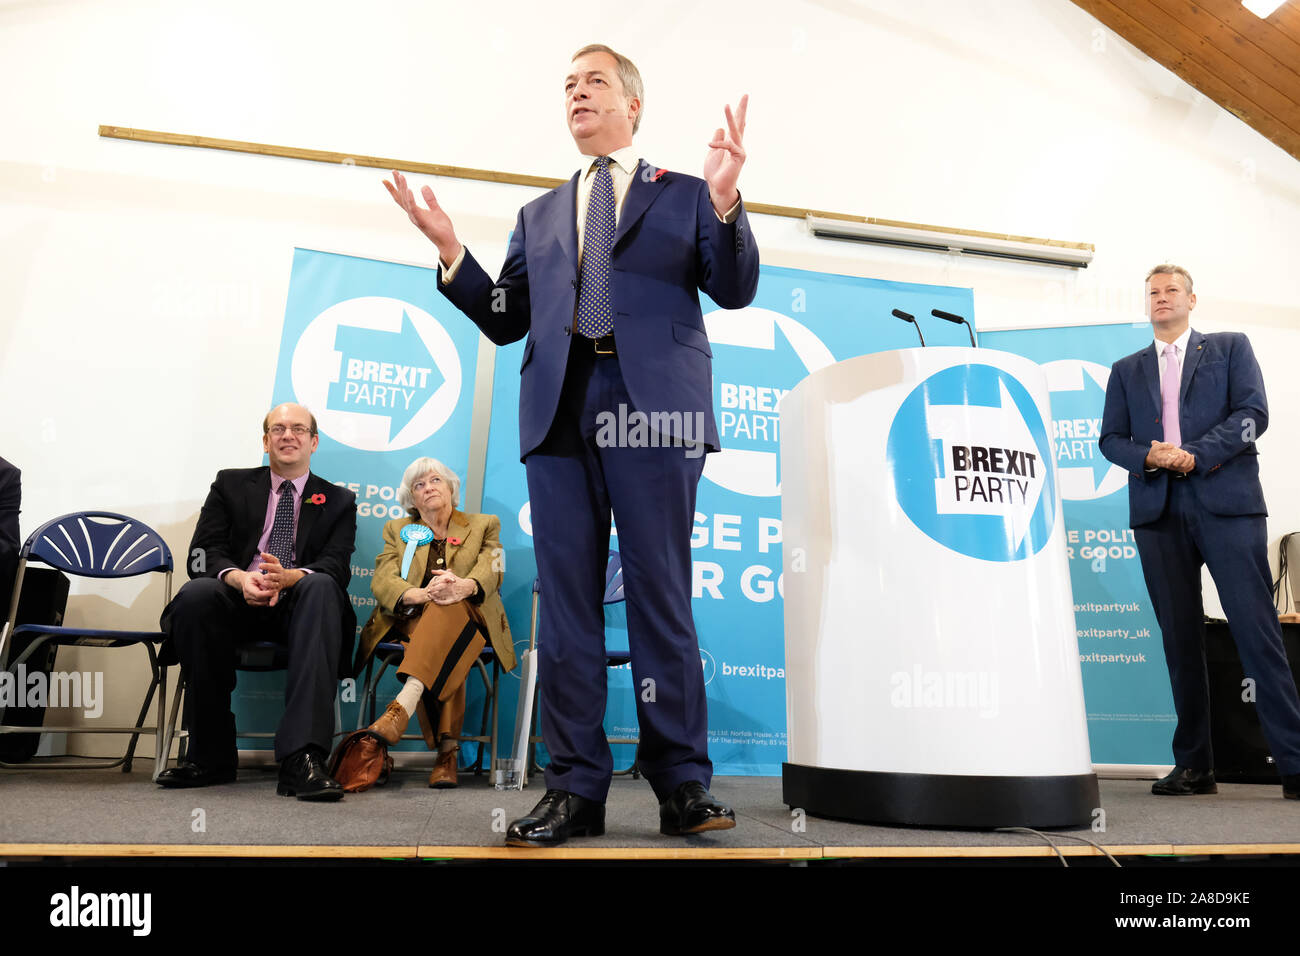 Little Mill, Pontypool, Monmouthshire, Wales - Friday 8th November 2019 - Brexit Party leader Nigel Farage addresses an audience in the south Wales town of Pontypool. Photo Steven May / Alamy Live News Stock Photo